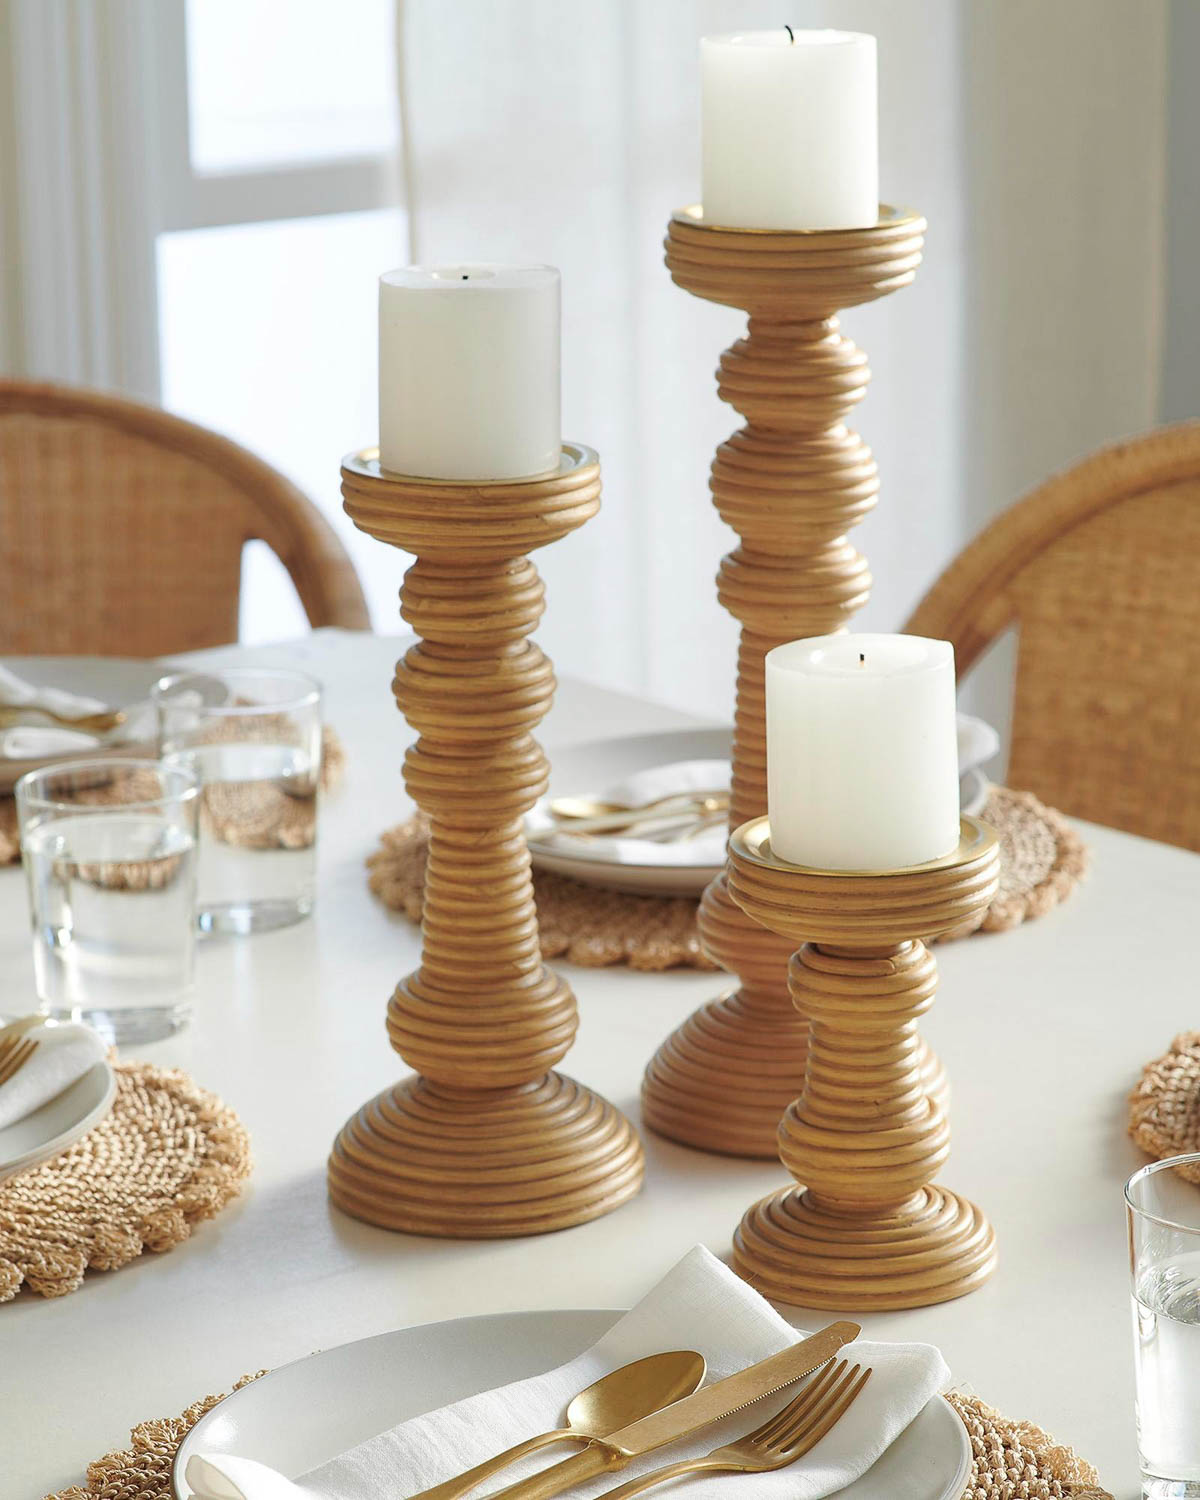 Group of three rattan candlesticks as a table centerpiece